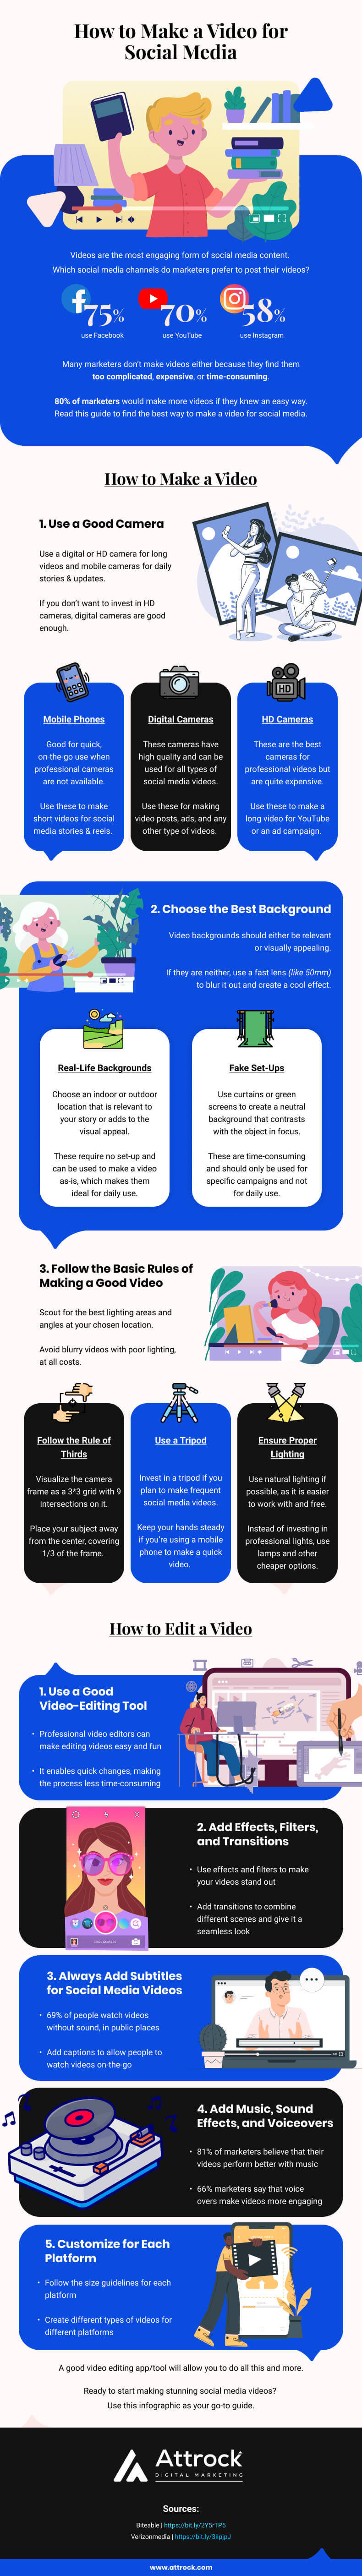 How to Make a Video for Social Media